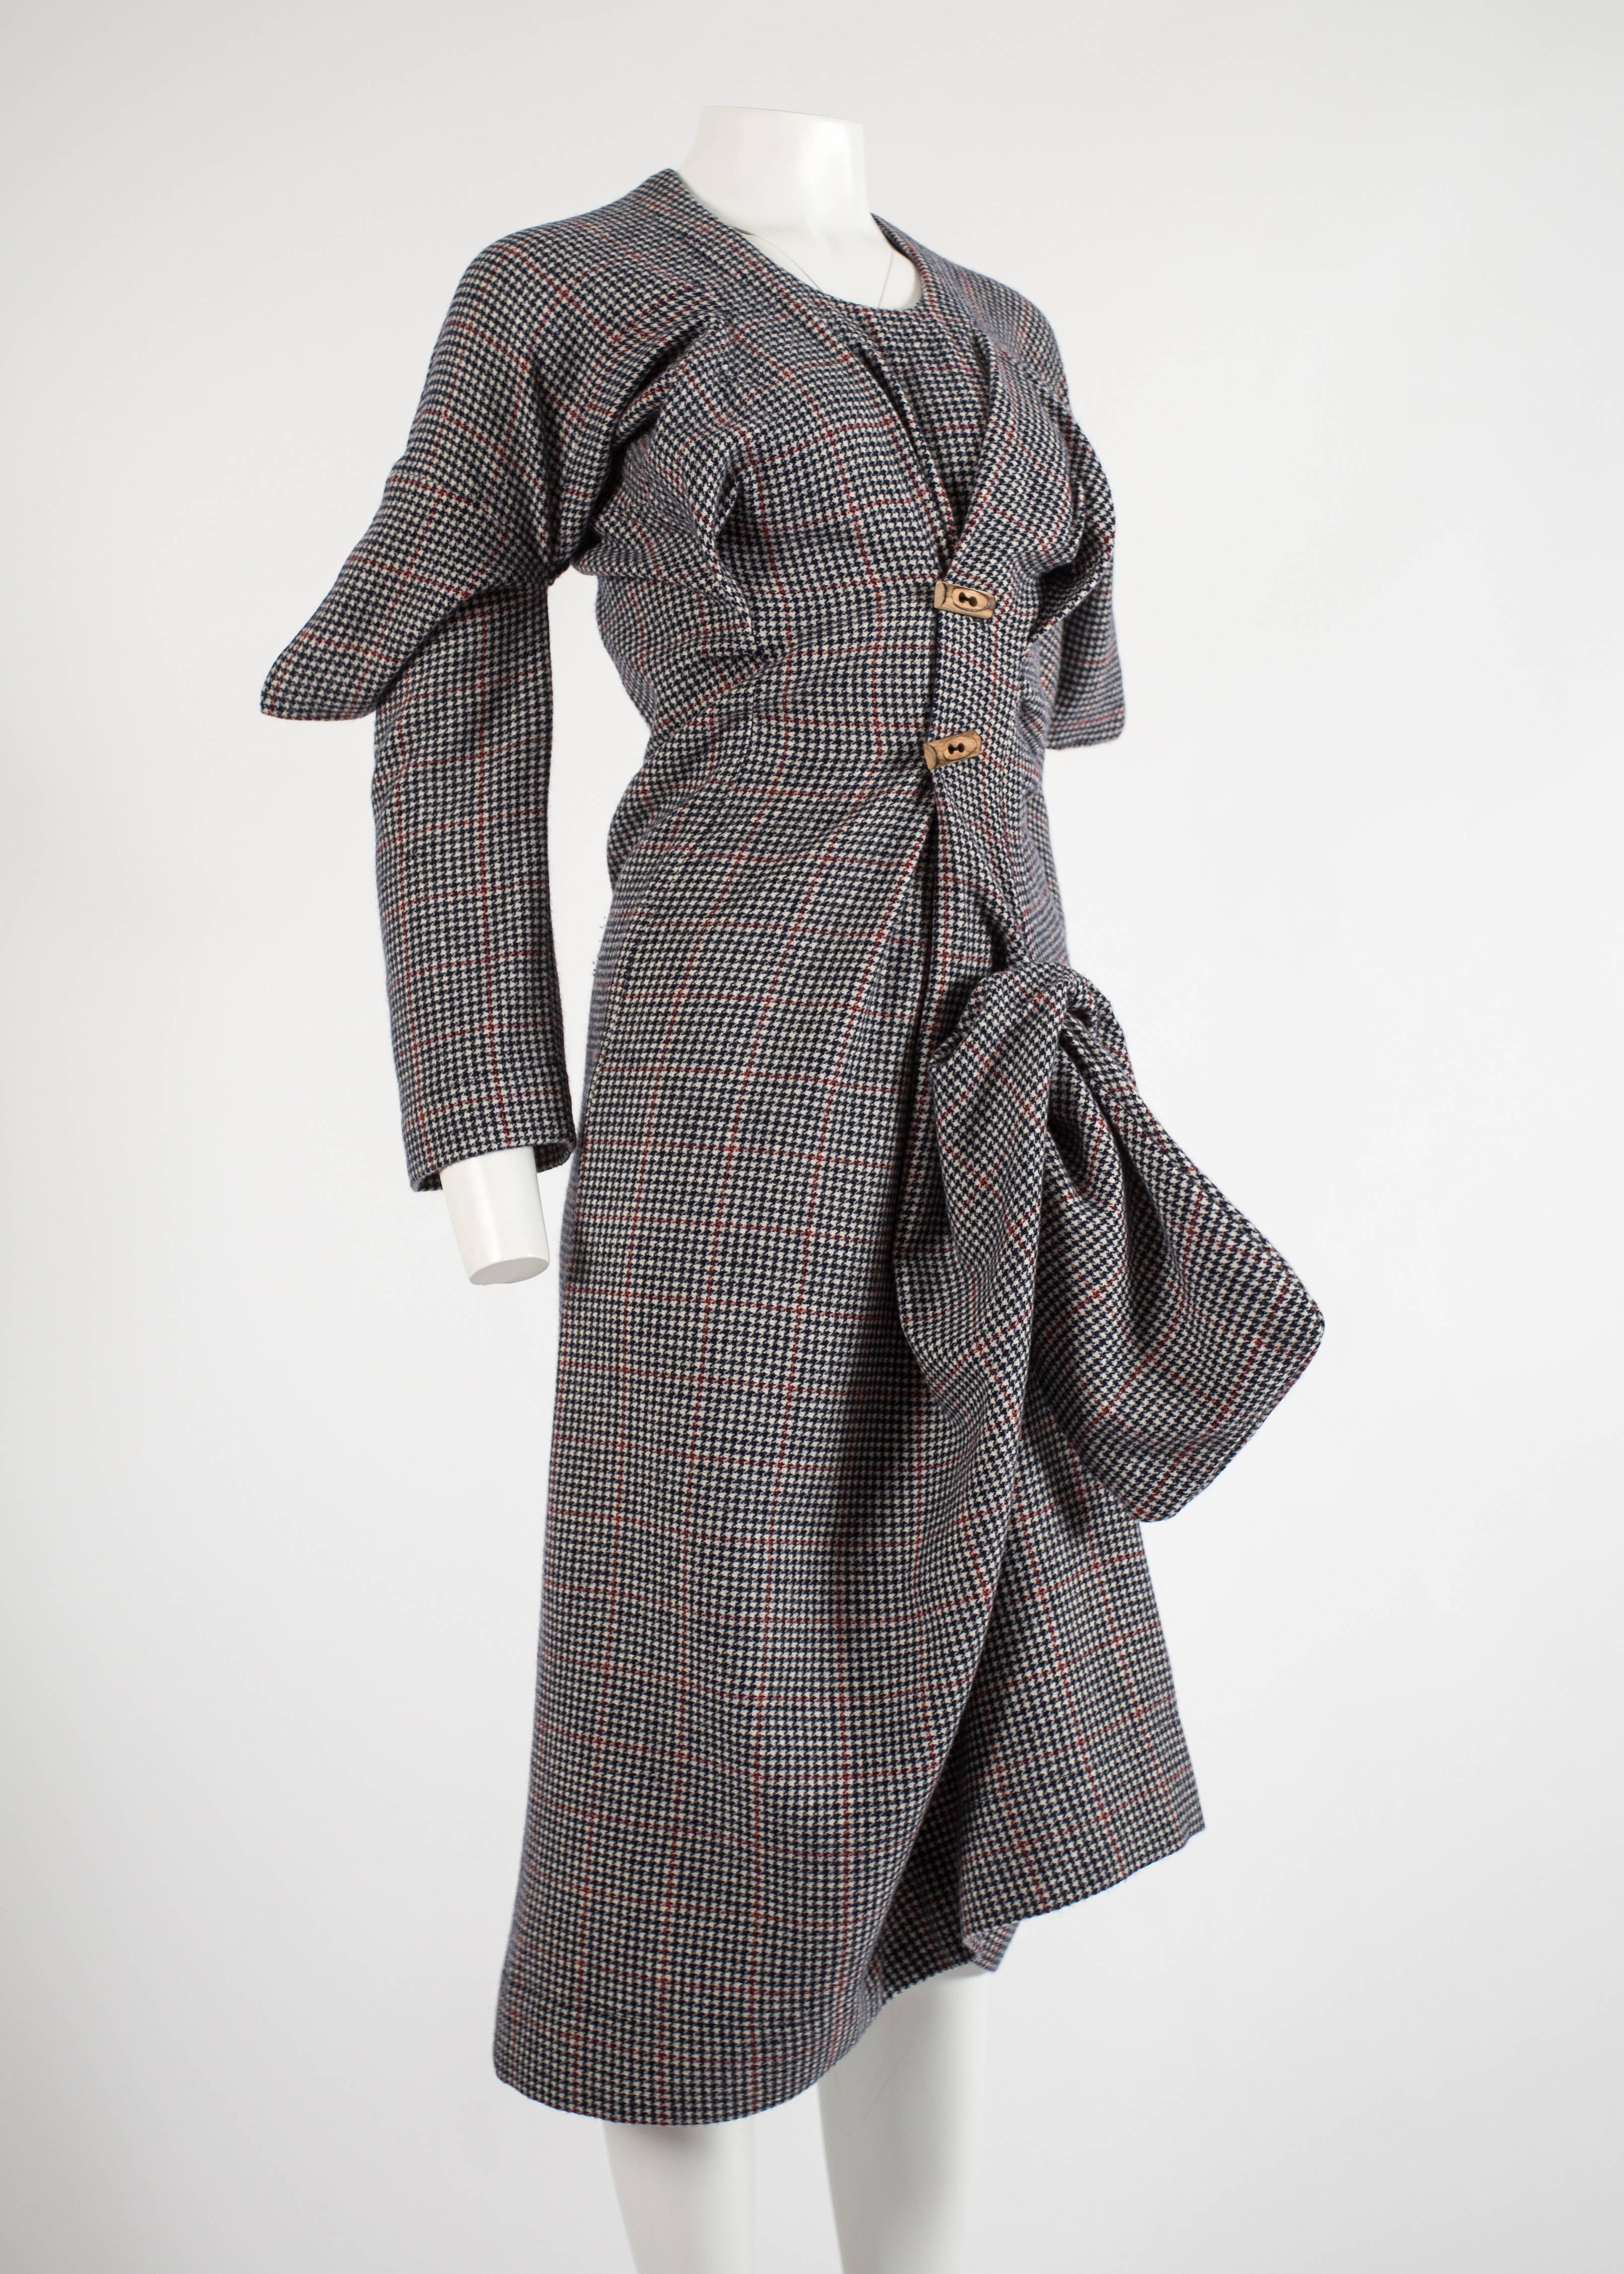 Worlds End by Vivienne Westwood checked wool 'Witches' dress, fw 1983 ...